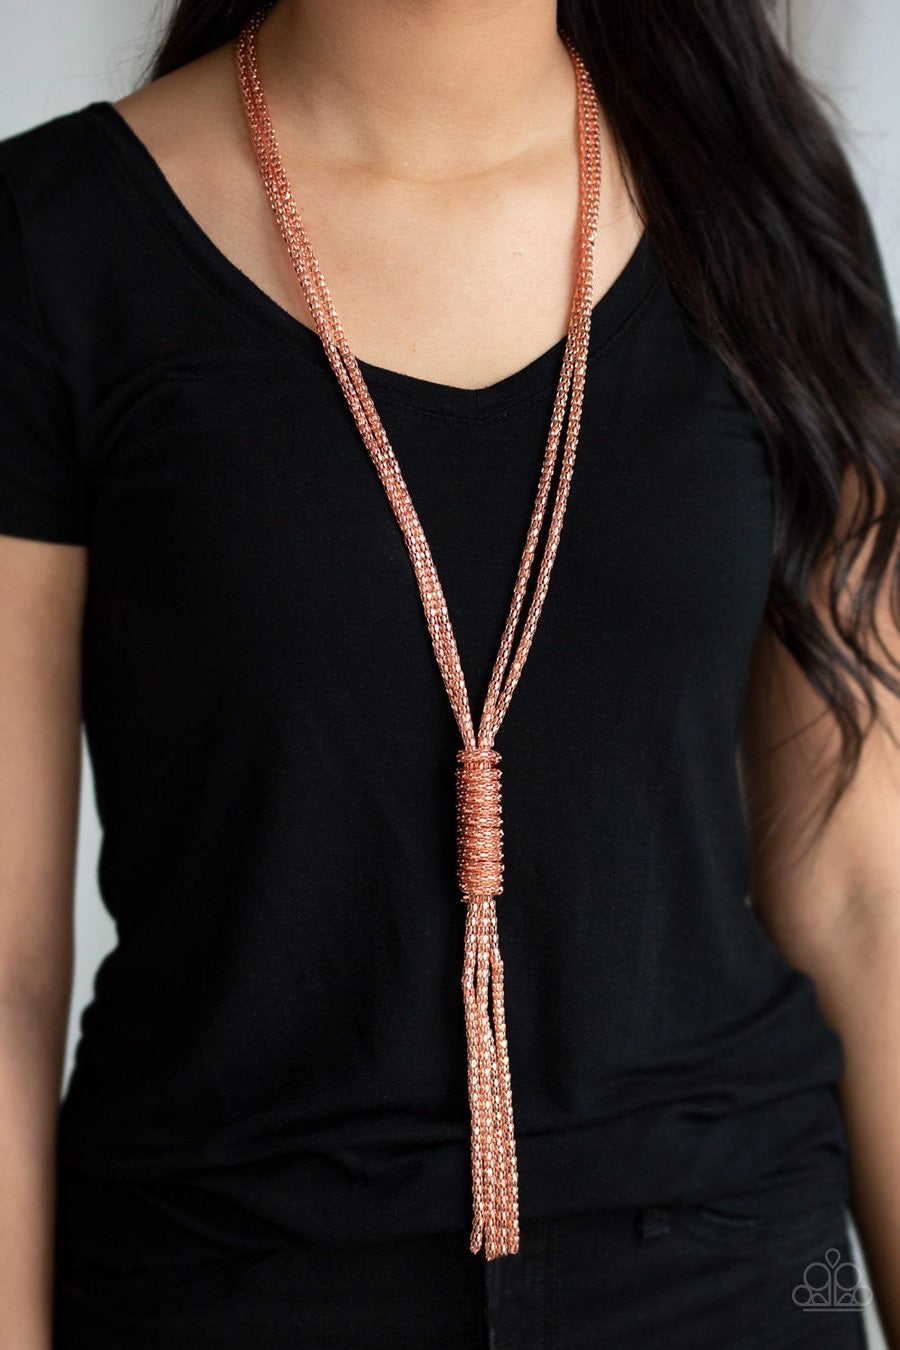 Boom Boom Knock You Out! - Copper Necklace